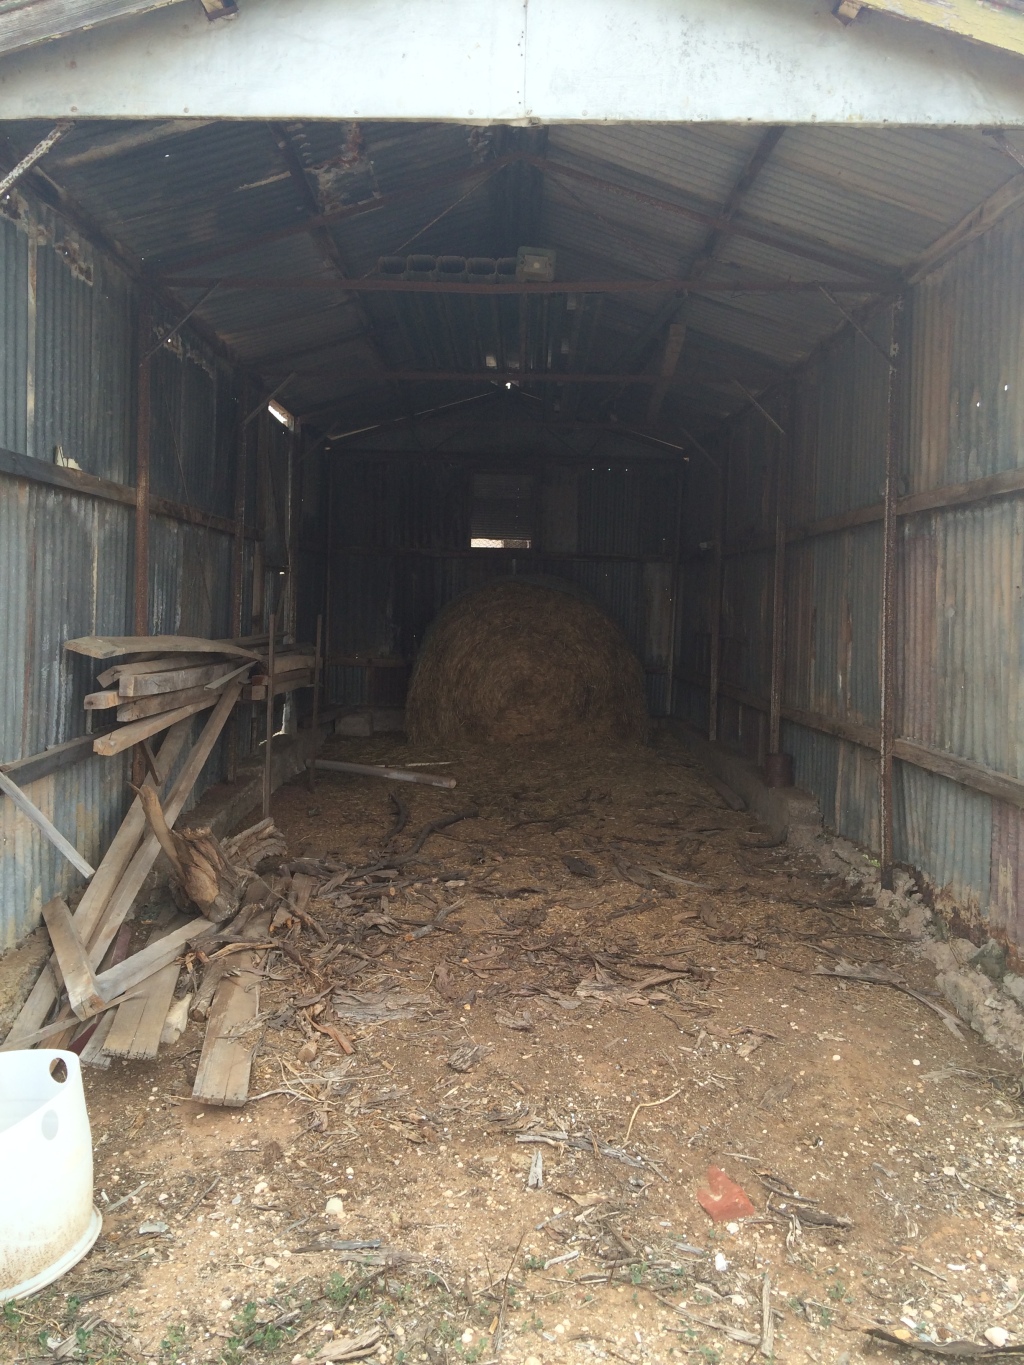 This is an old motor shed - around 3 x 7 or 8. We've also converted this into a farrowing shed, but will need to put up lean boards before putting a mum in there.